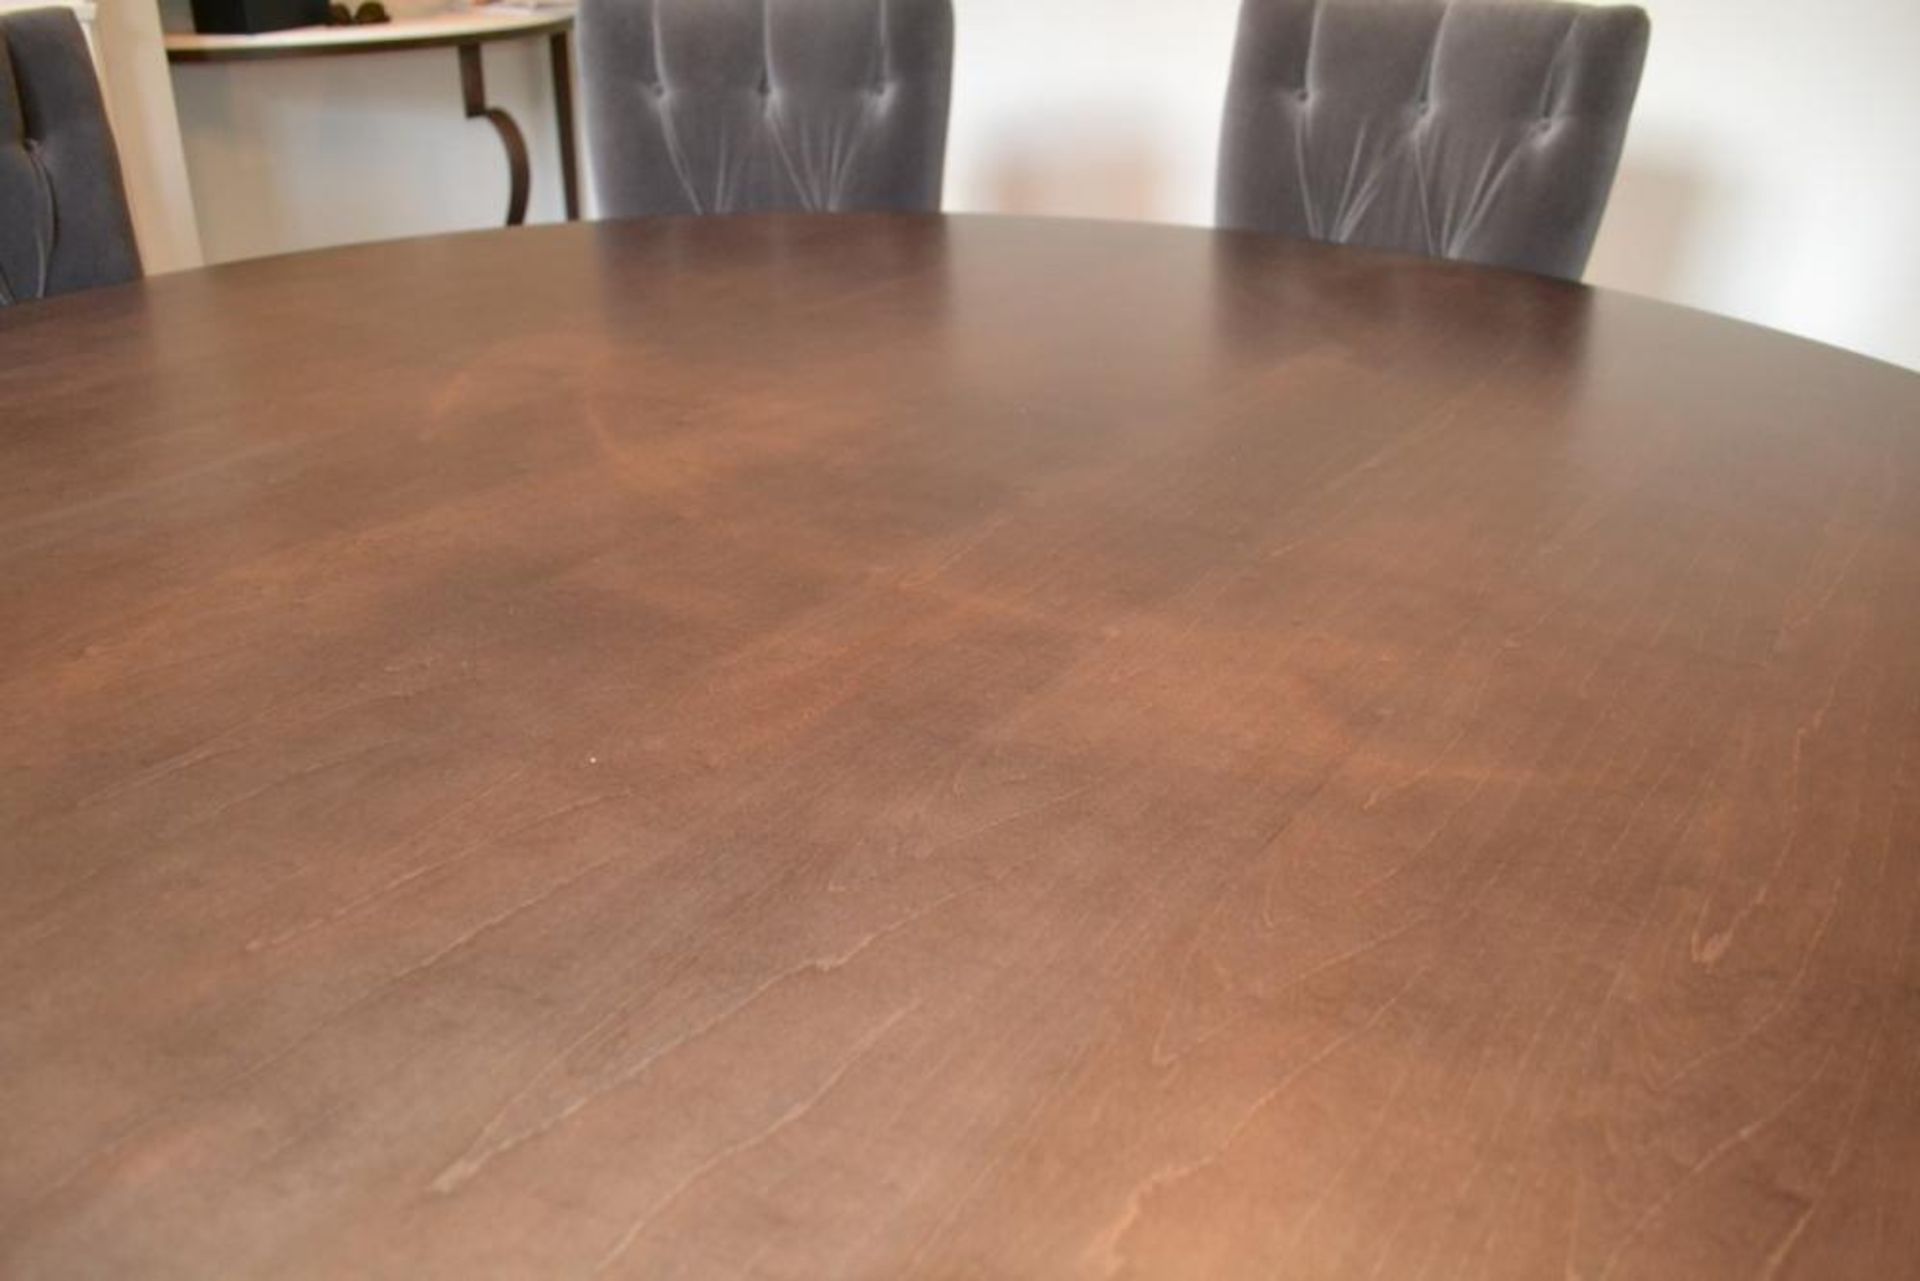 1 x Bespoke Round Dining Table With Sycamore Wood Finish - Includes Set of Six Grey Button Back - Image 8 of 20